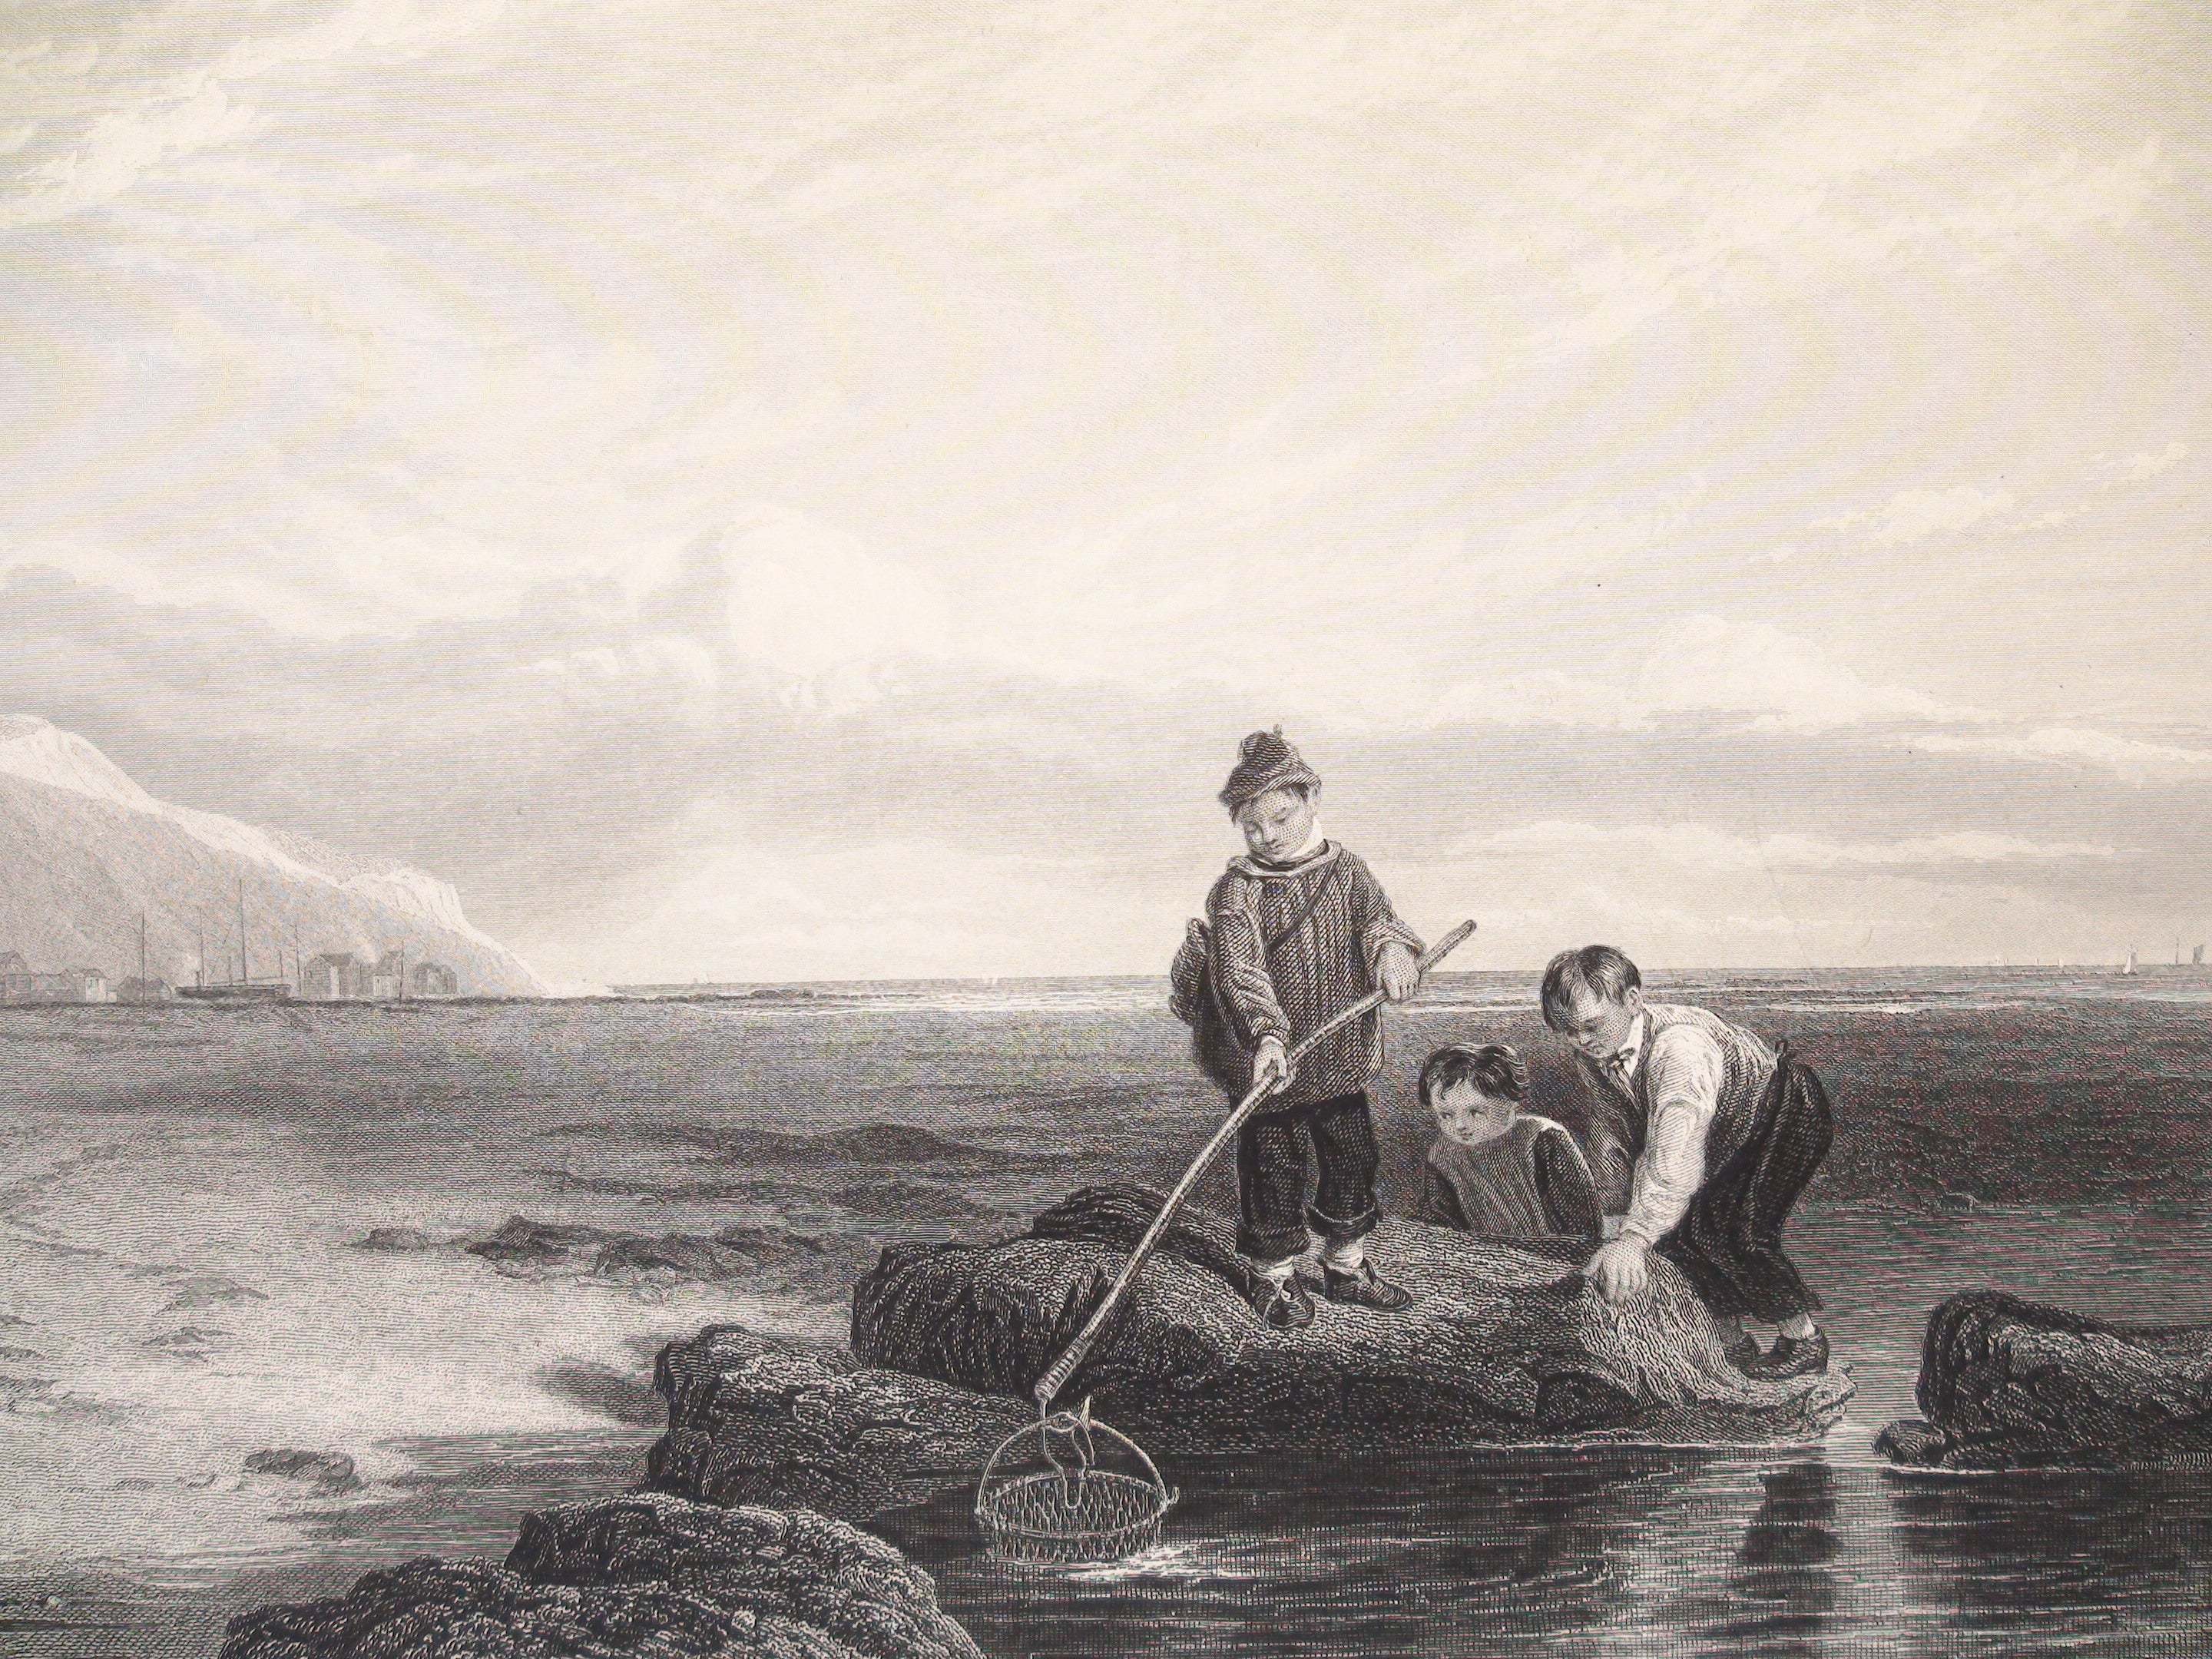 The Prawn Fishers by W. Collins, Steel Engraving by J. T. Willmore, 1860